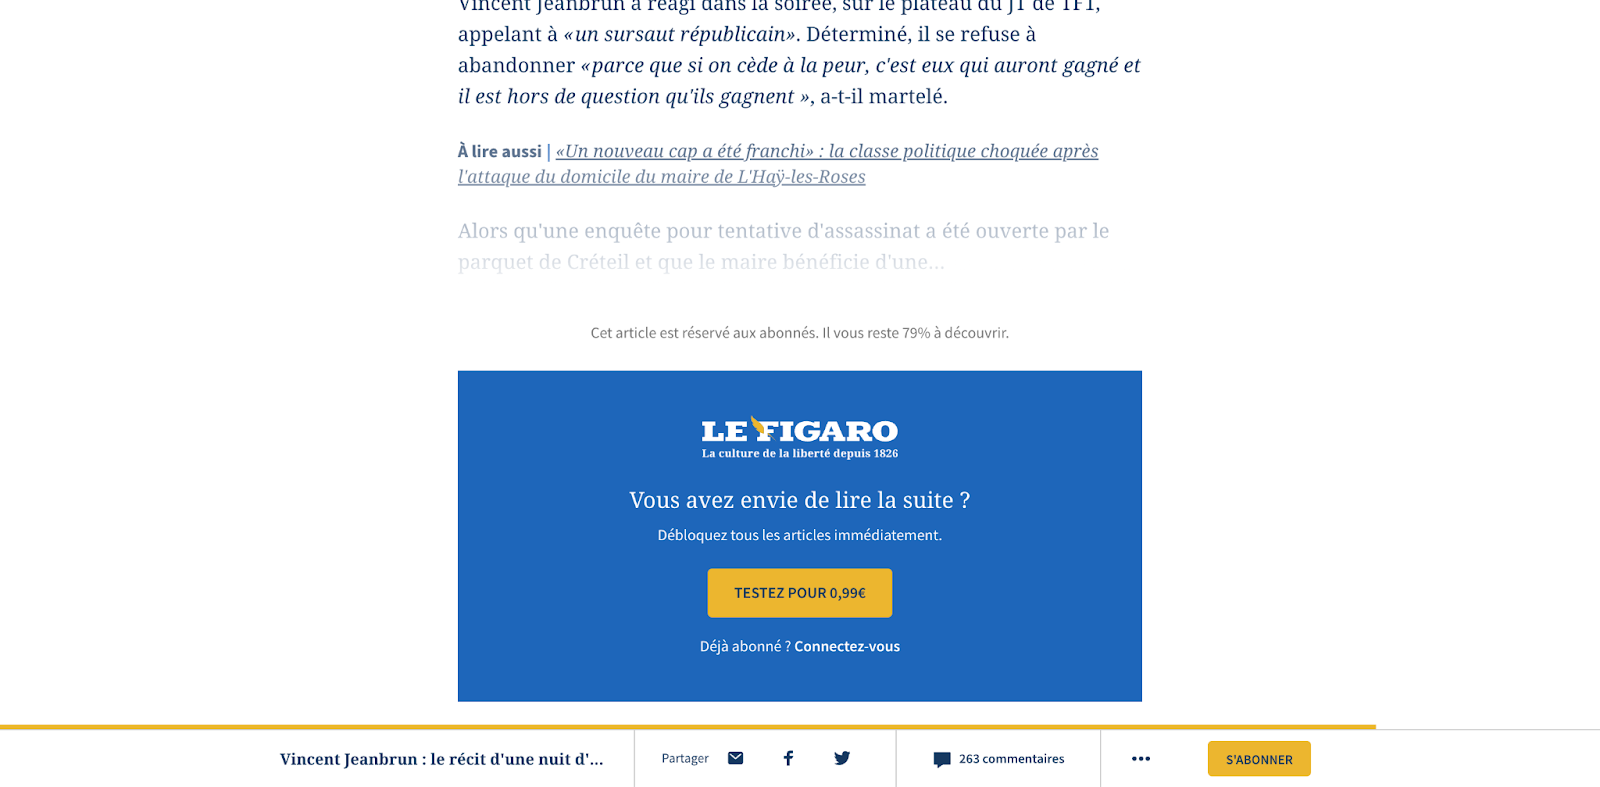 Le Figaro paywall